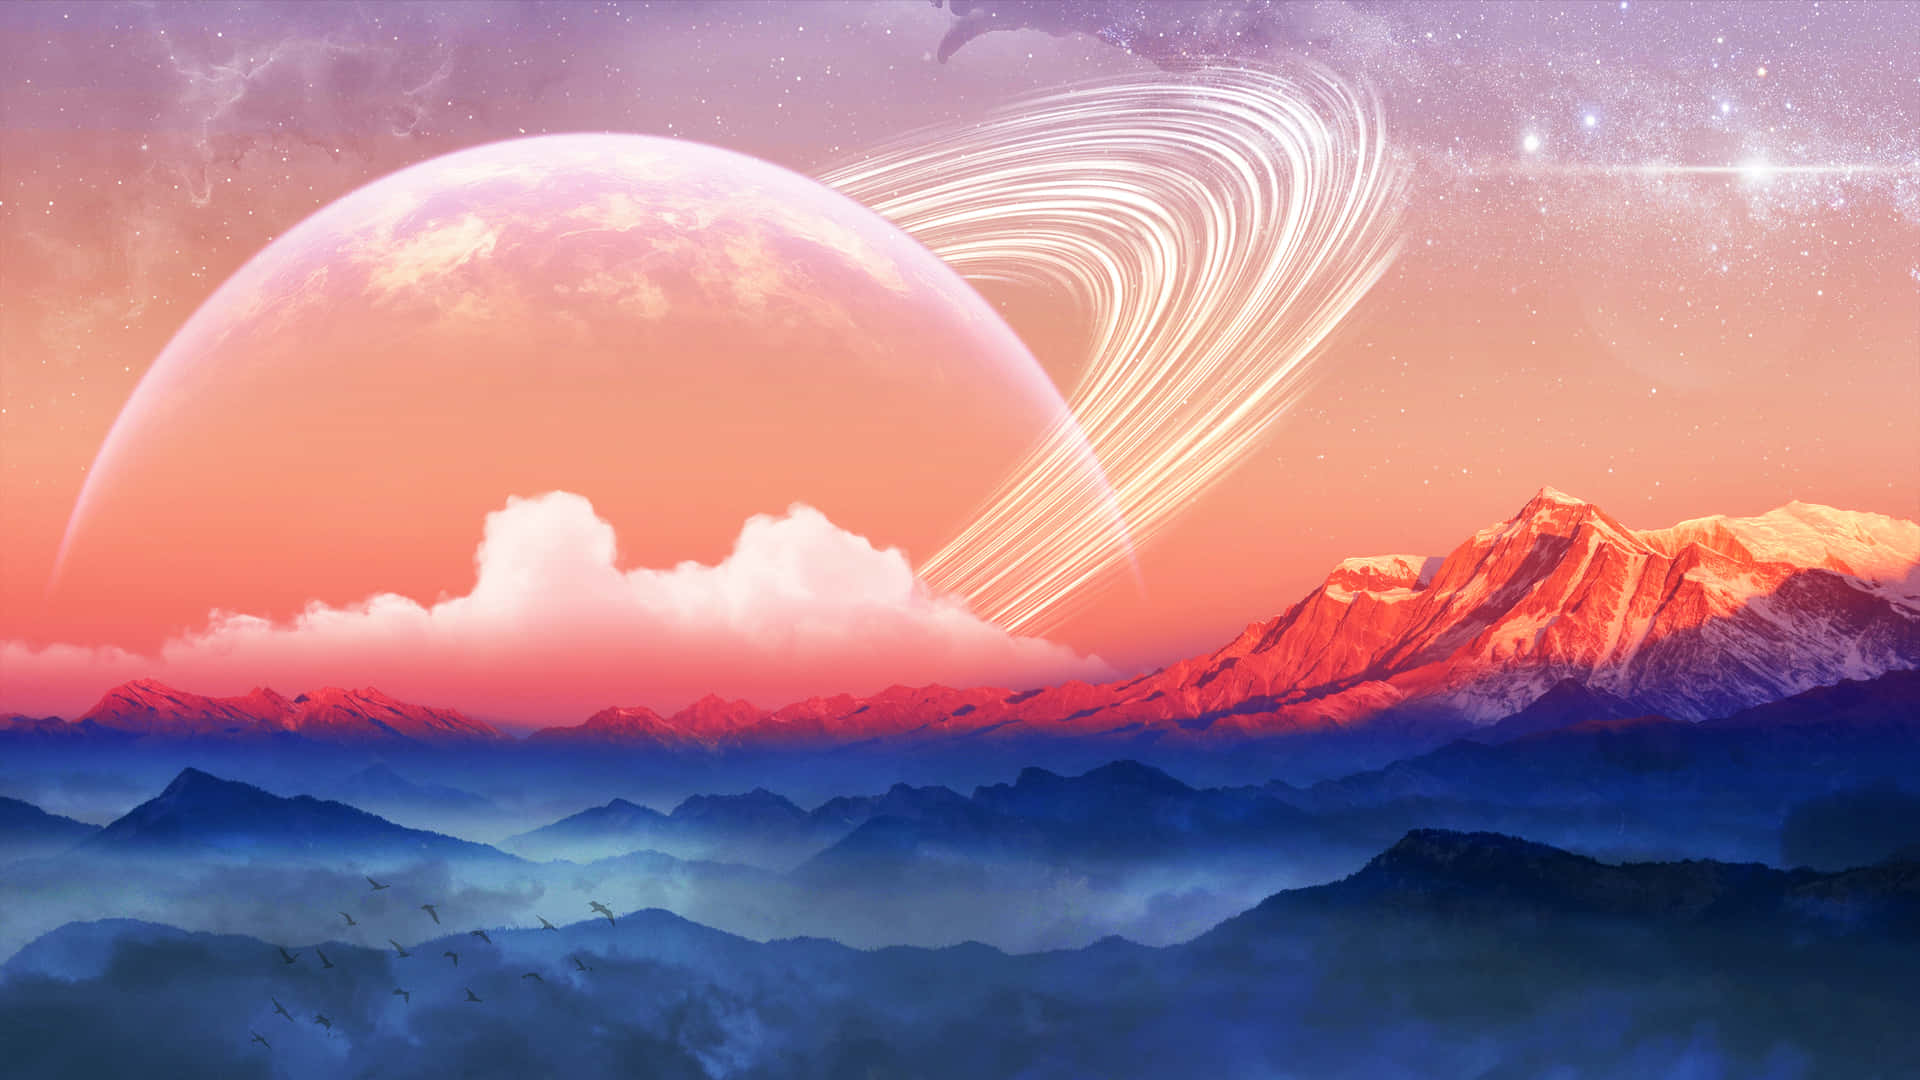 Cool Digital Art Of Saturn And Mountains Picture